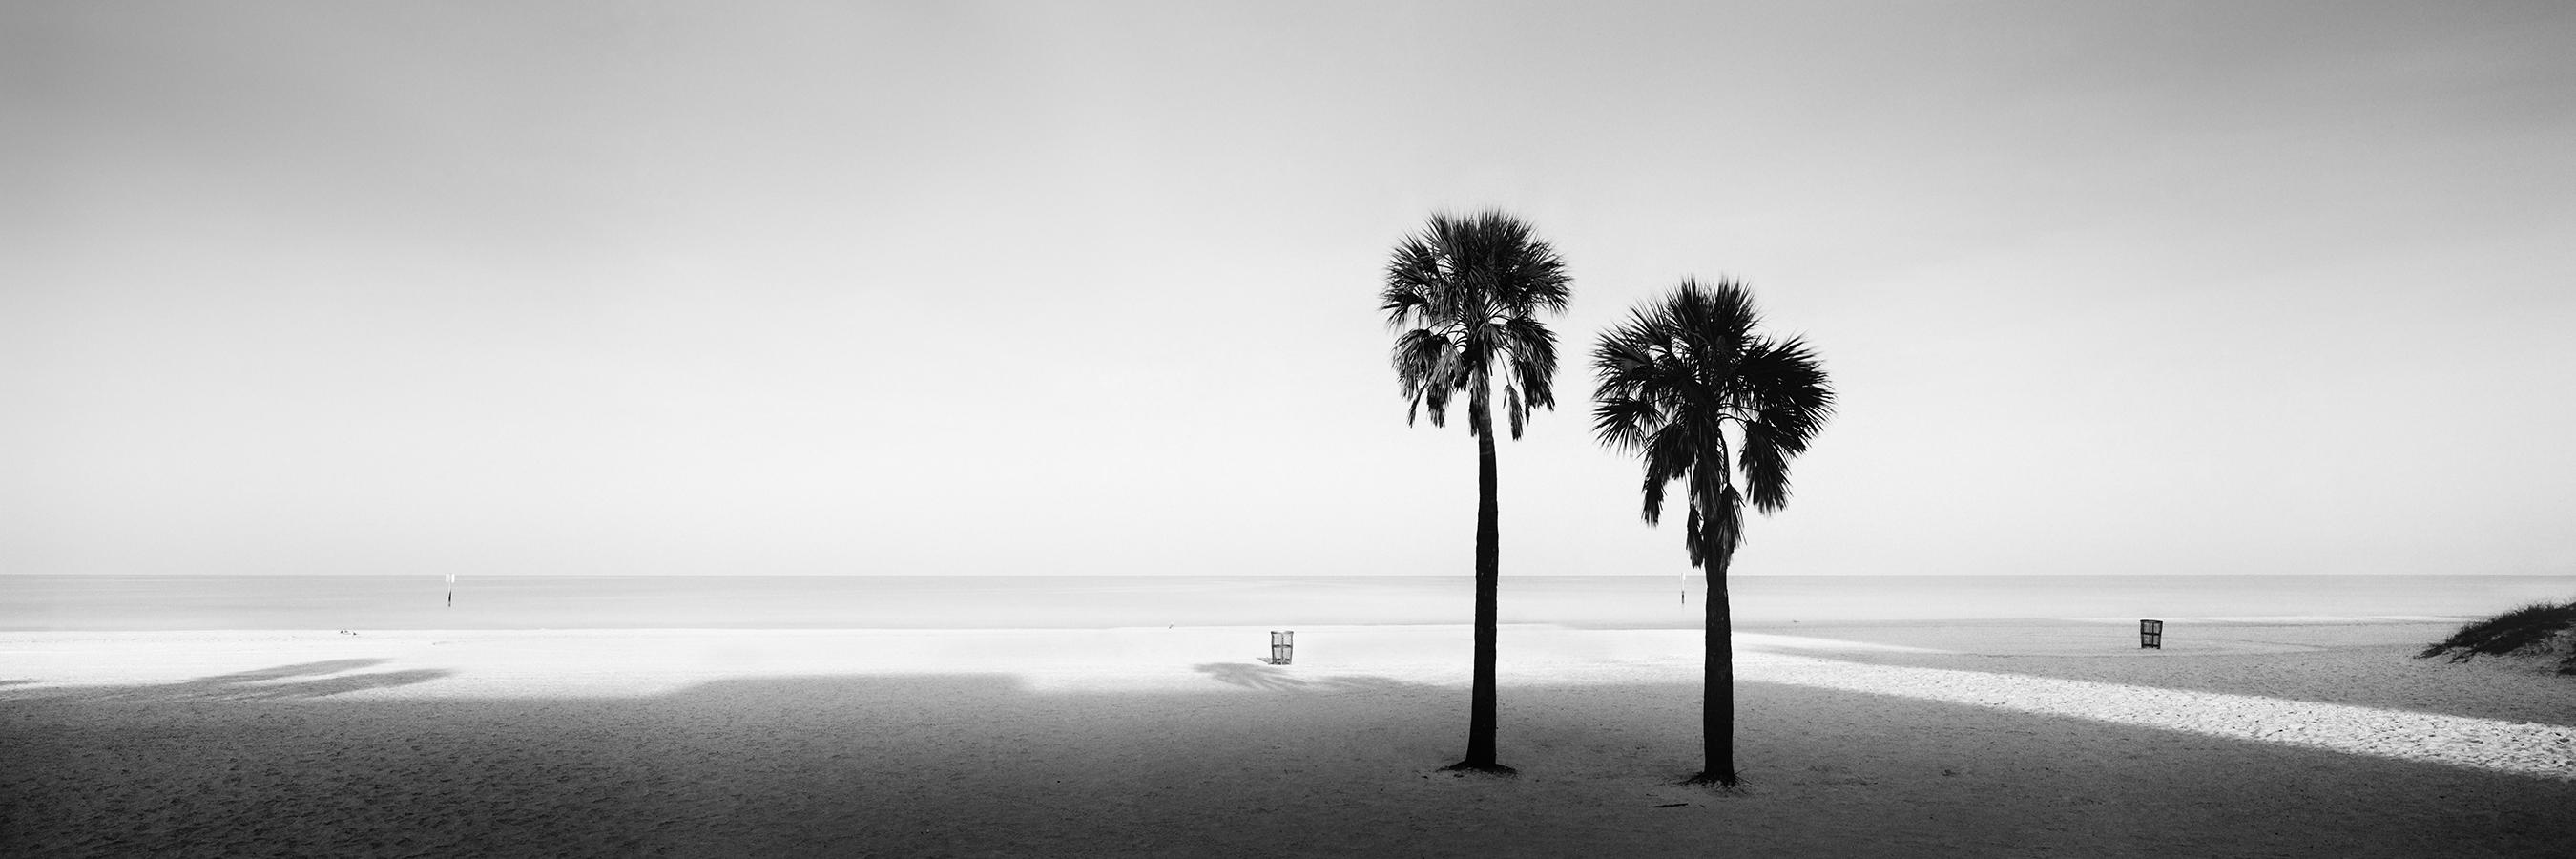 Gerald Berghammer Landscape Photograph - Two Palms Beach Florida USA black and white panorama landscape art photography  